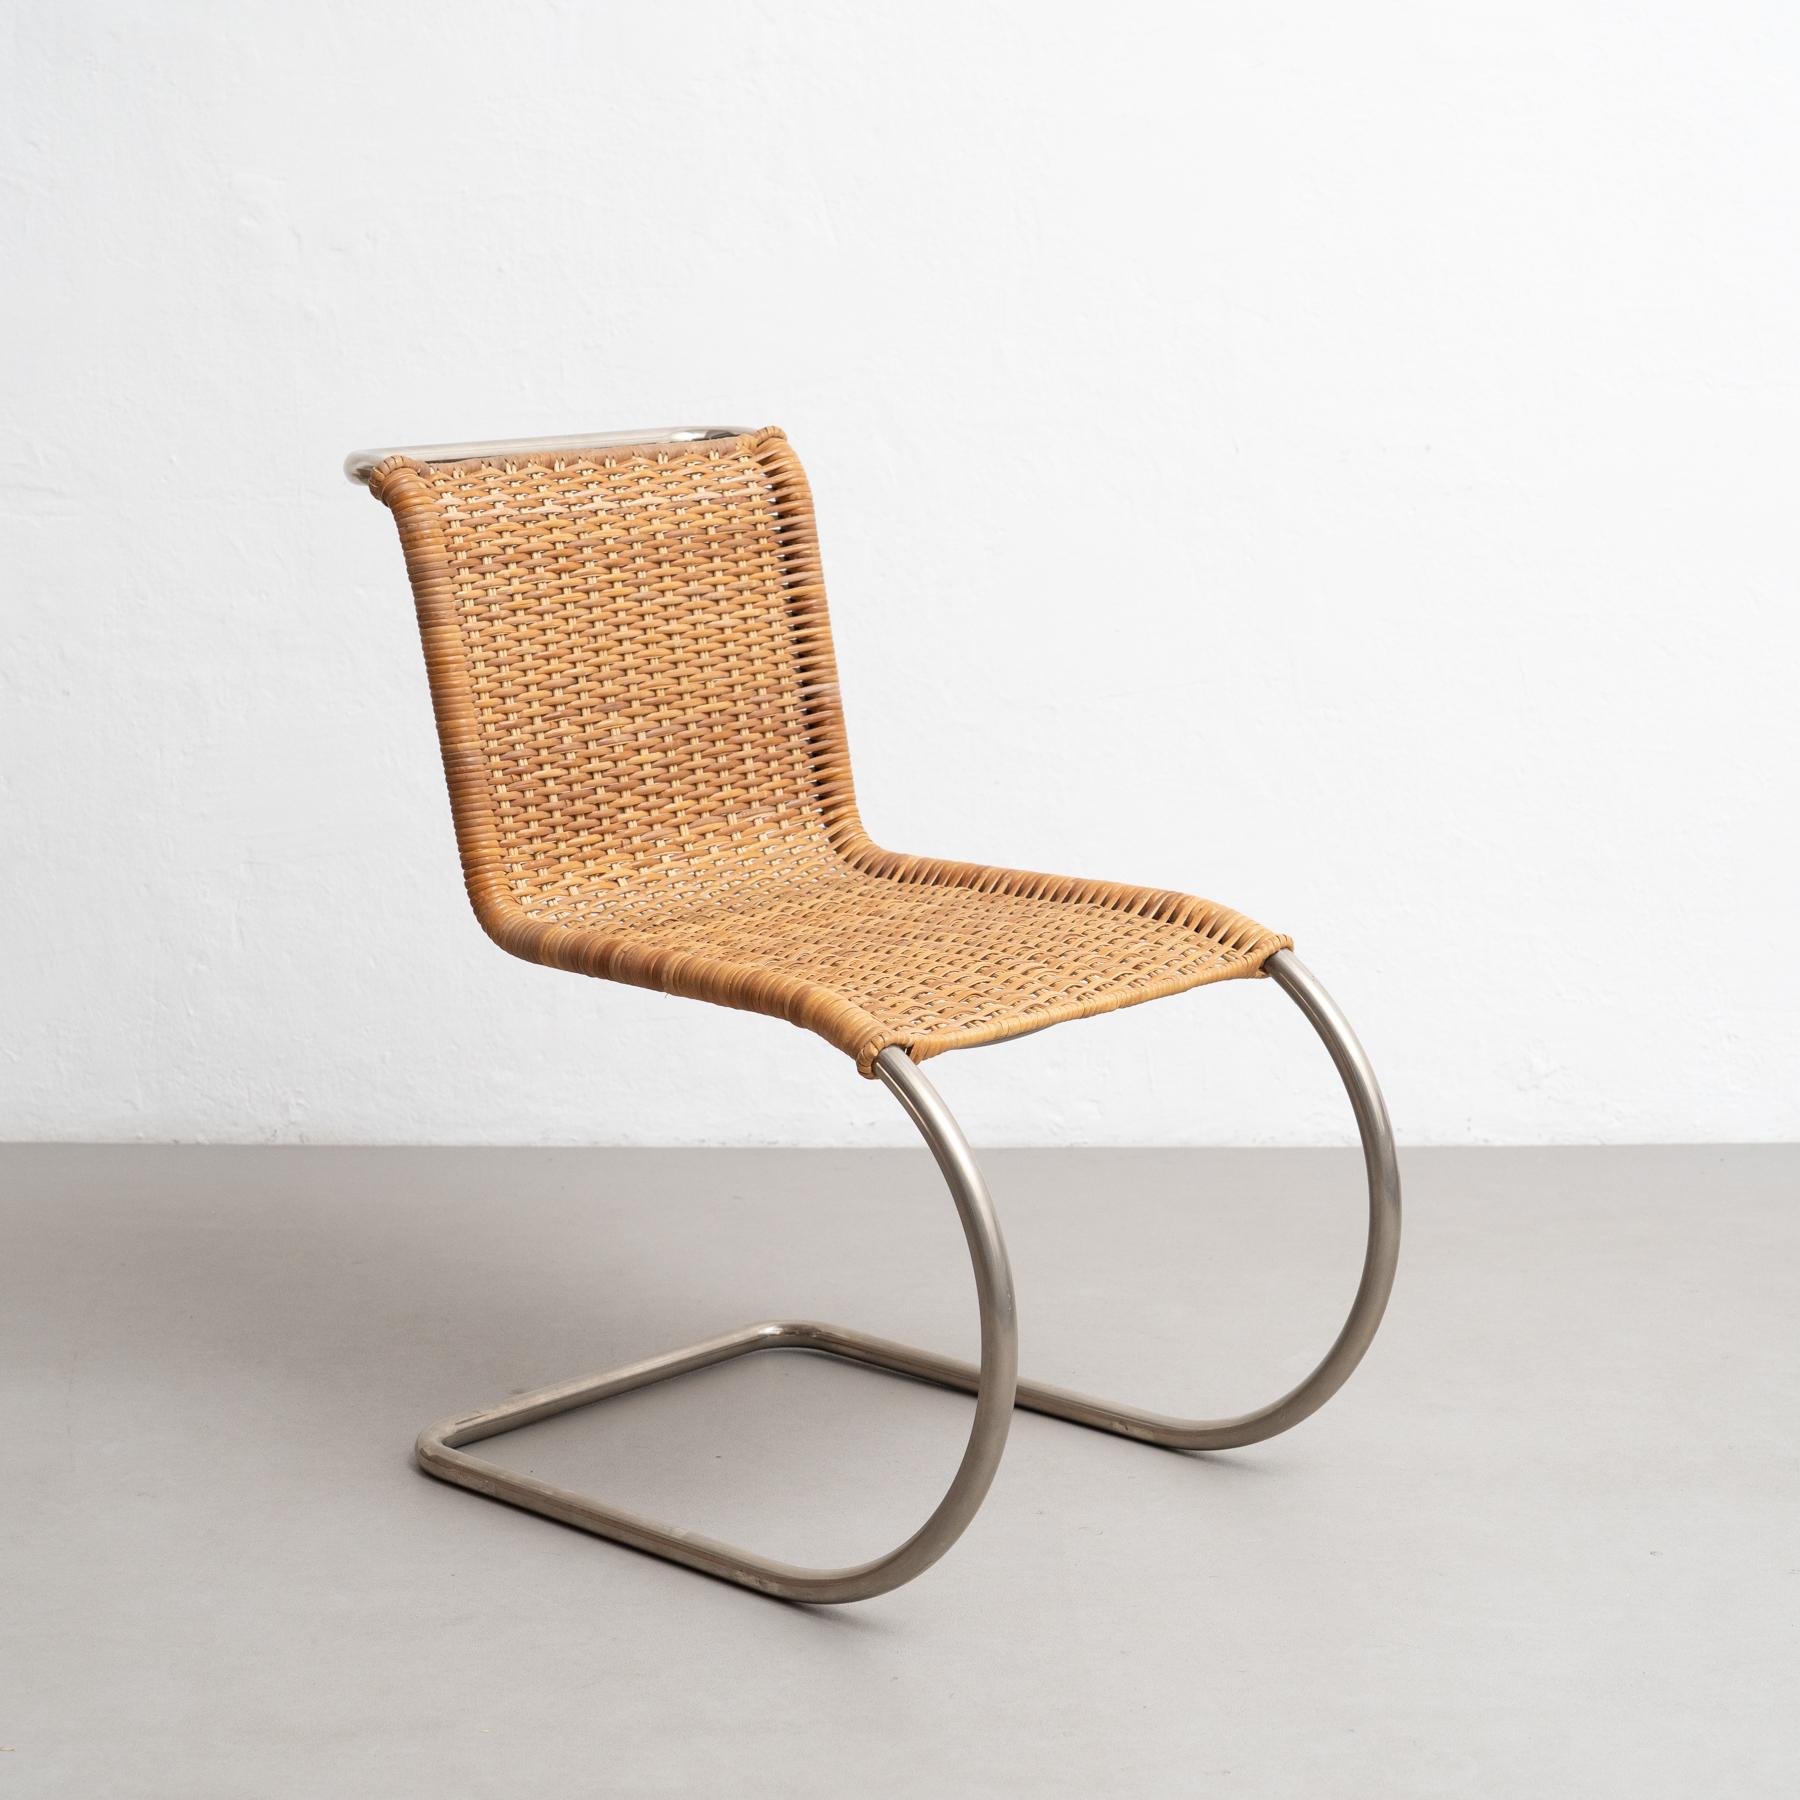 This MR10 chair designed by Ludwig Mies van der Rohe in 1927 is a true masterpiece of modern design. Manufactured by Tecta in Germany circa 1960, these chair are a testament to the enduring popularity of Mies van der Rohe's innovative and timeless